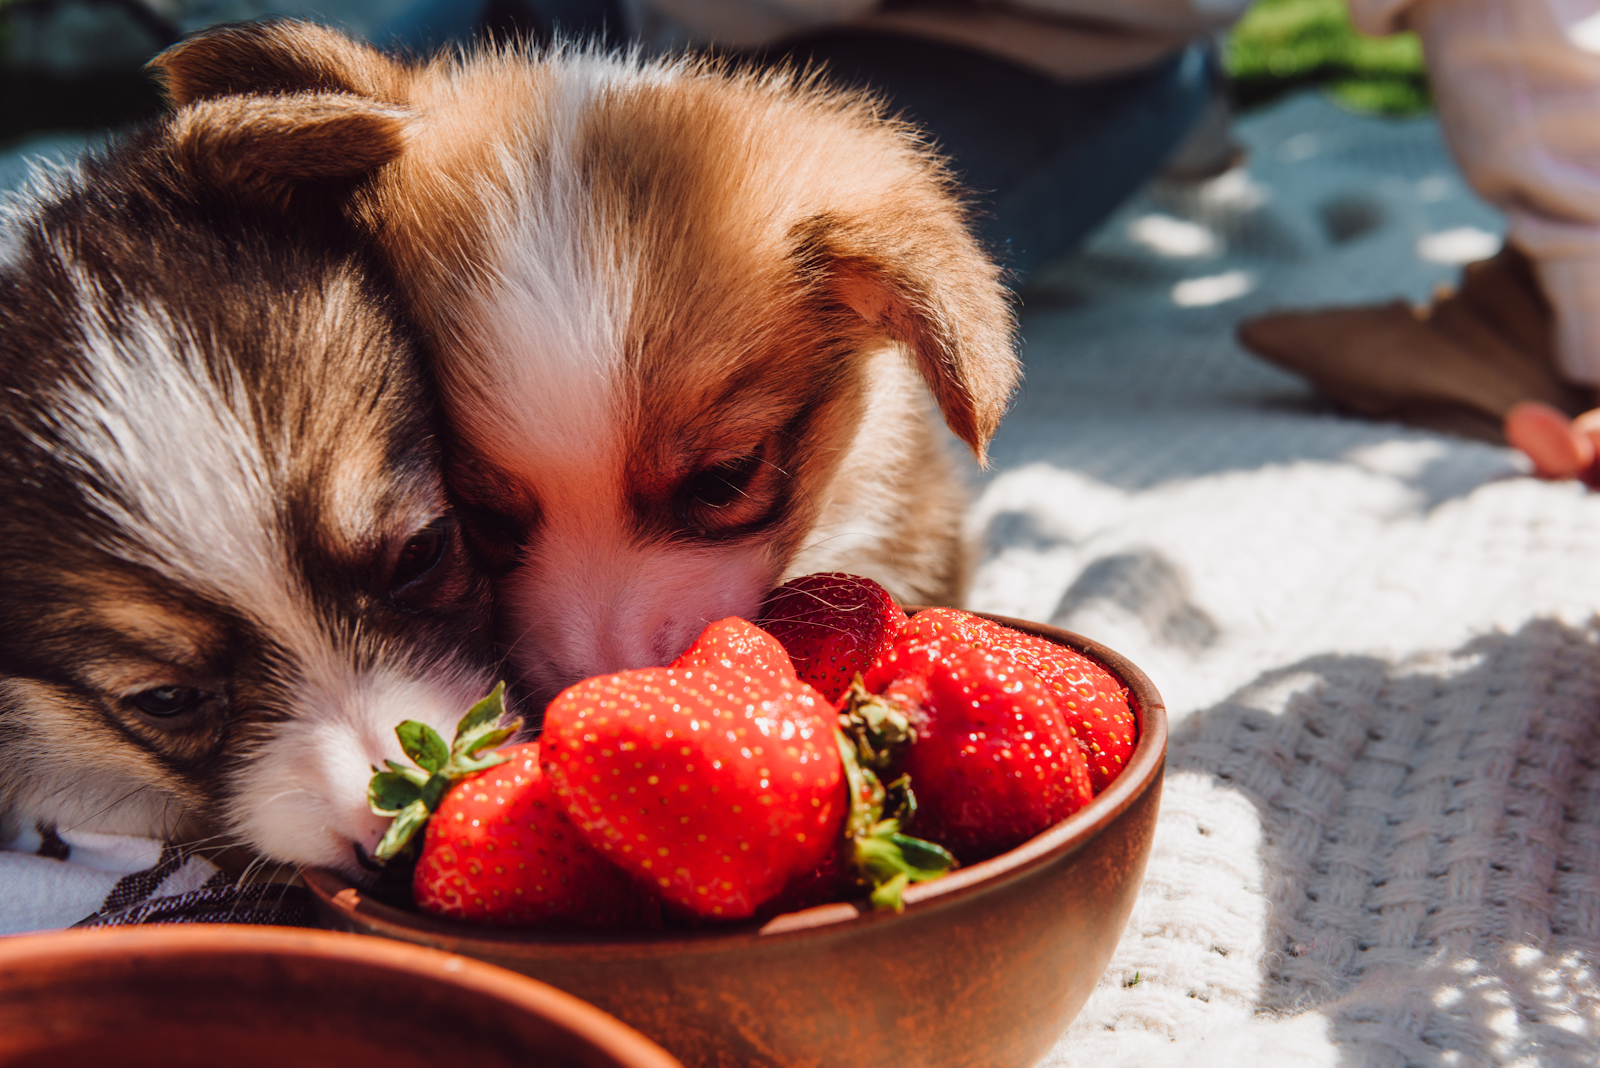 Puppies eating strawberries together from bowl during picnic at sunny day